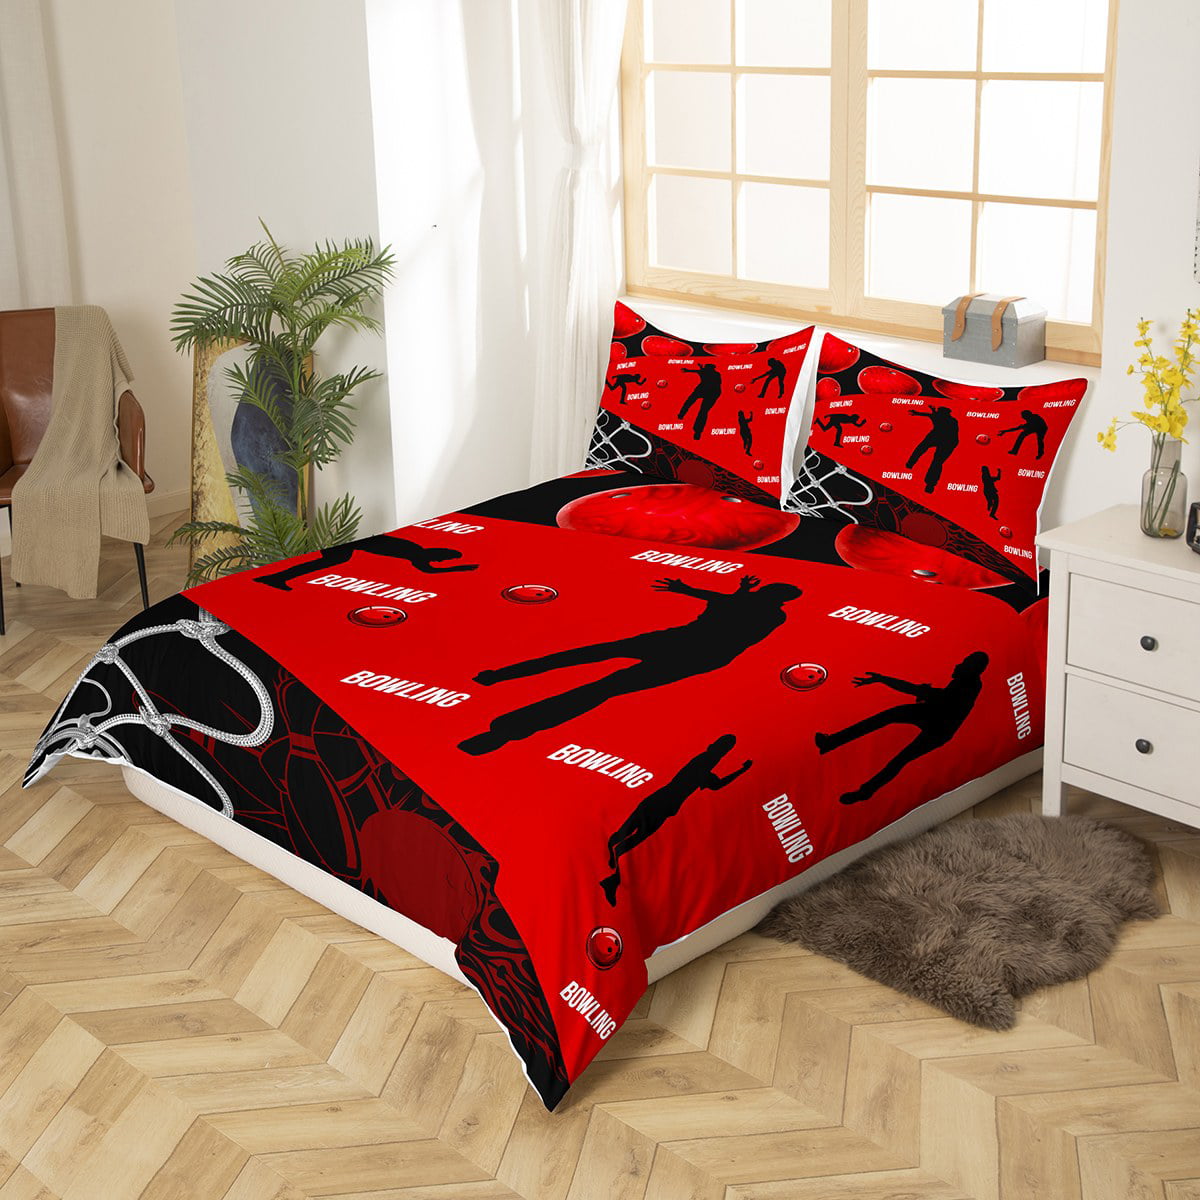 Ambesonne Bowling Party Duvet Cover Set, Symmetrical Pins, King, Blue White  Red